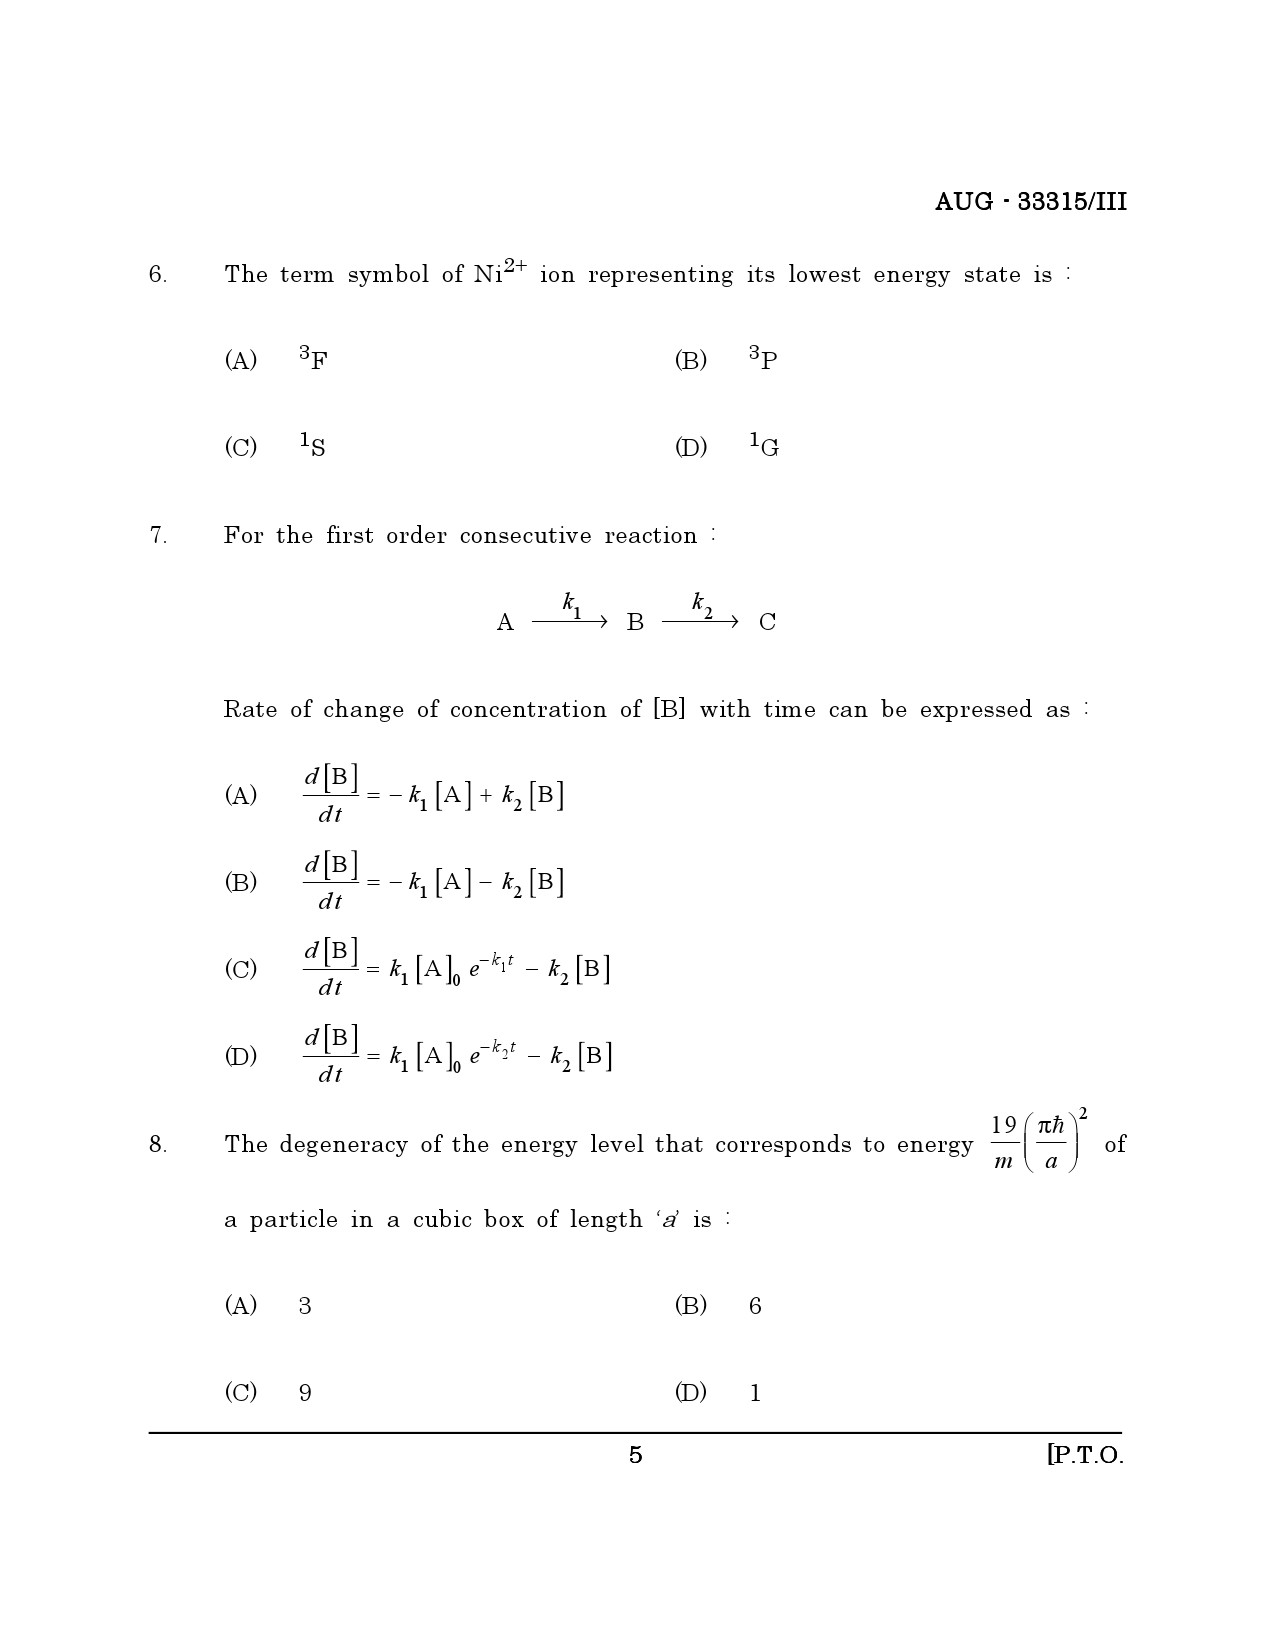 Maharashtra SET Chemical Sciences Question Paper III August 2015 4